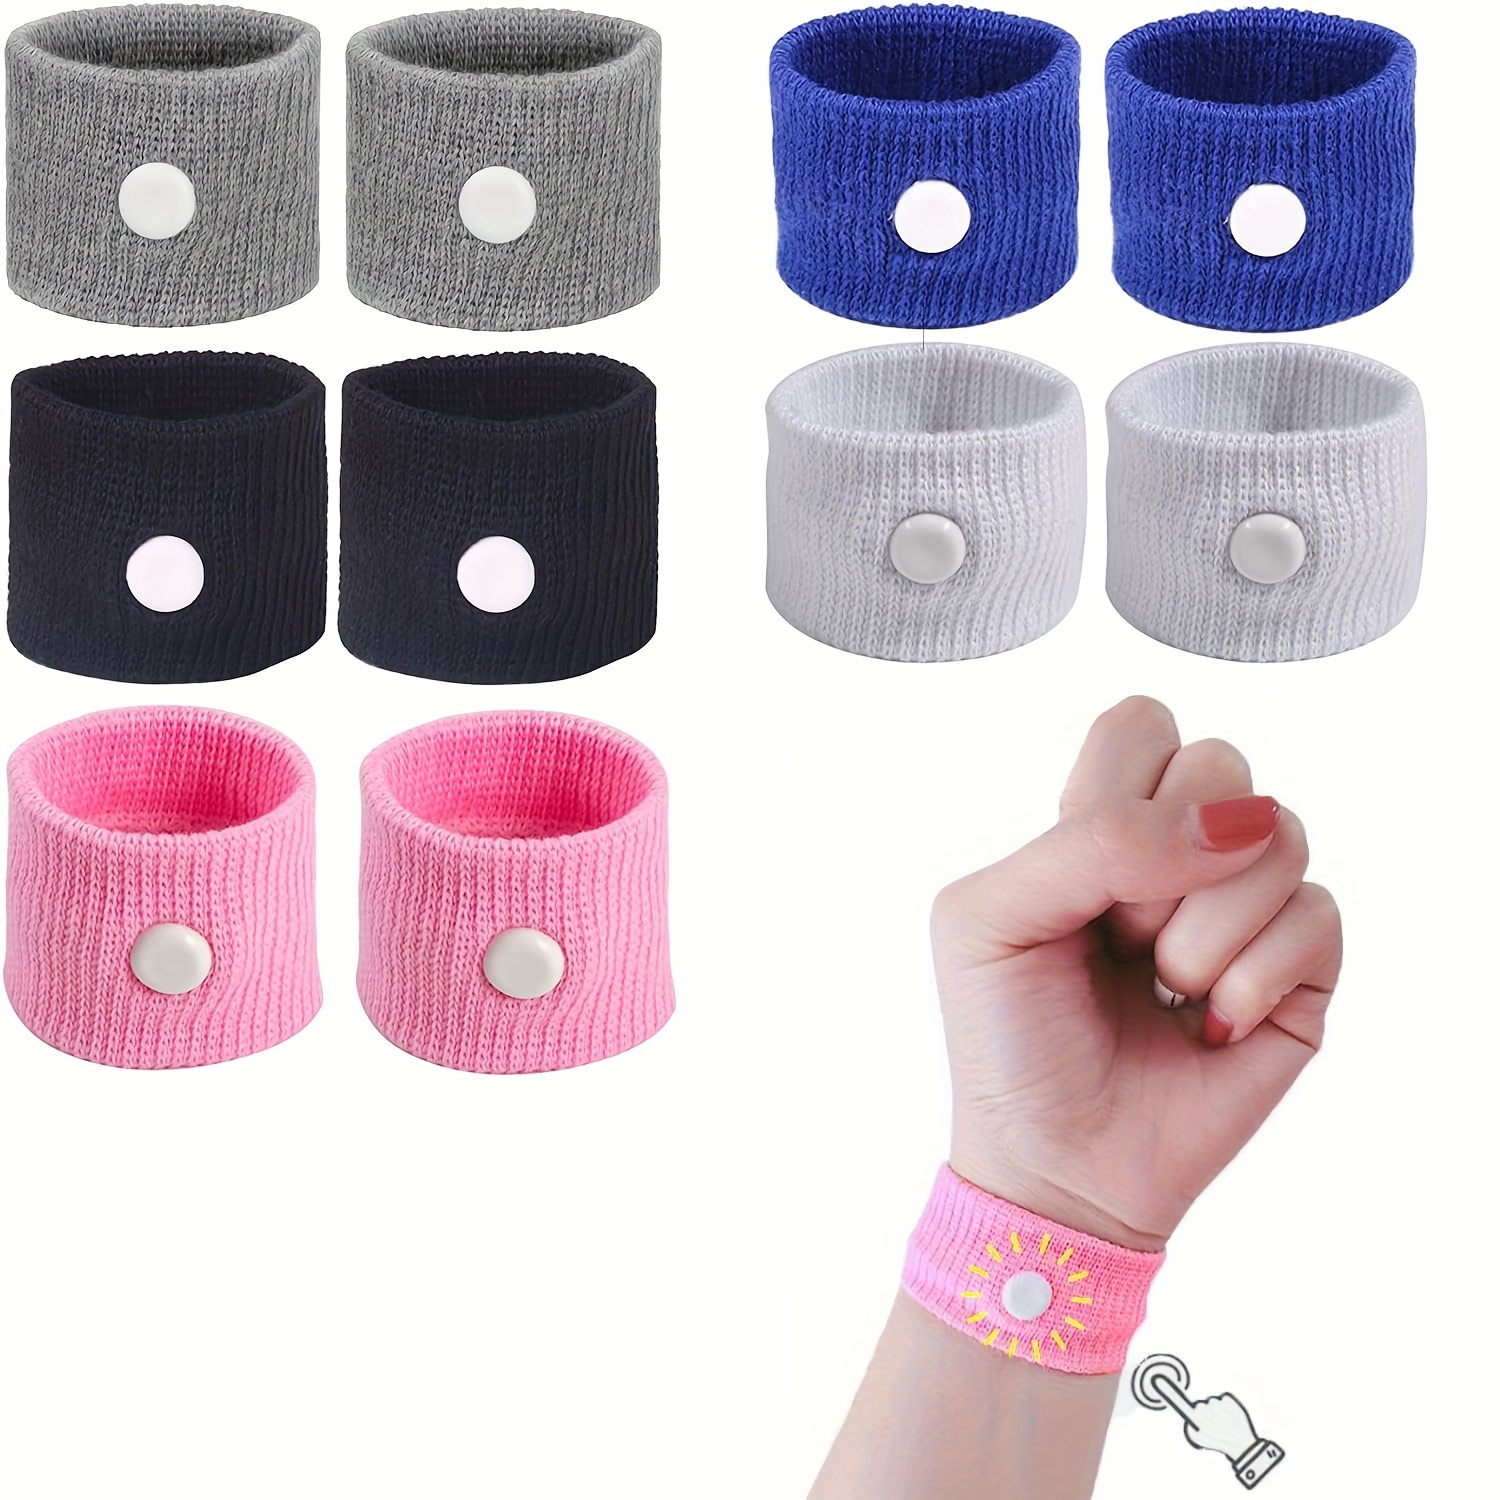 Anxiety Bracelet for Women-Adjustable Calming Acupressure Band